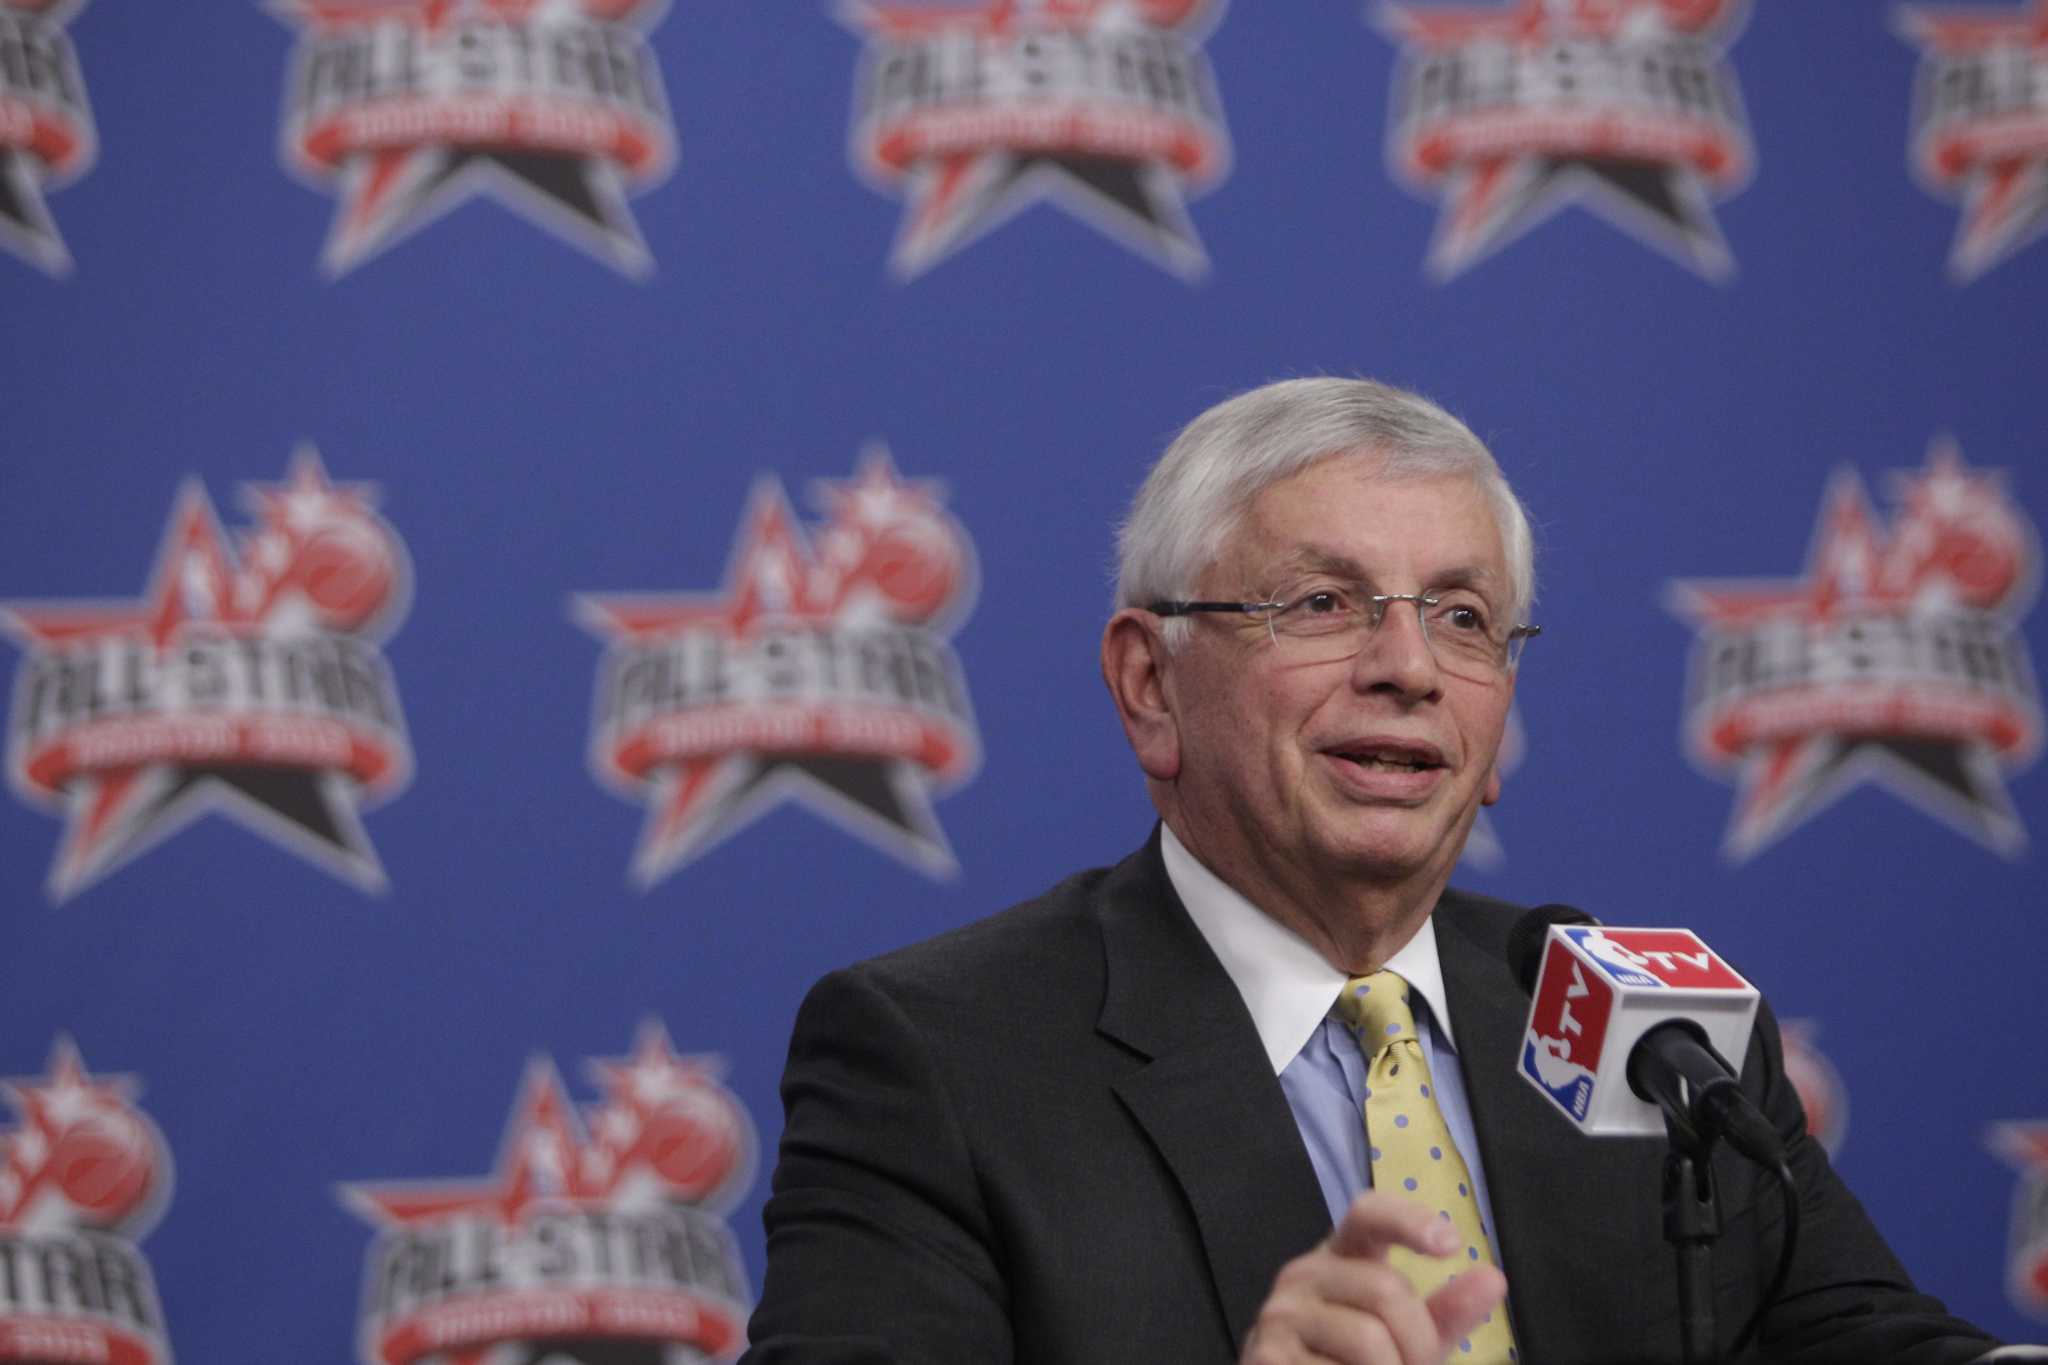 David Stern, who transformed NBA into a global sports power, dies at age 77